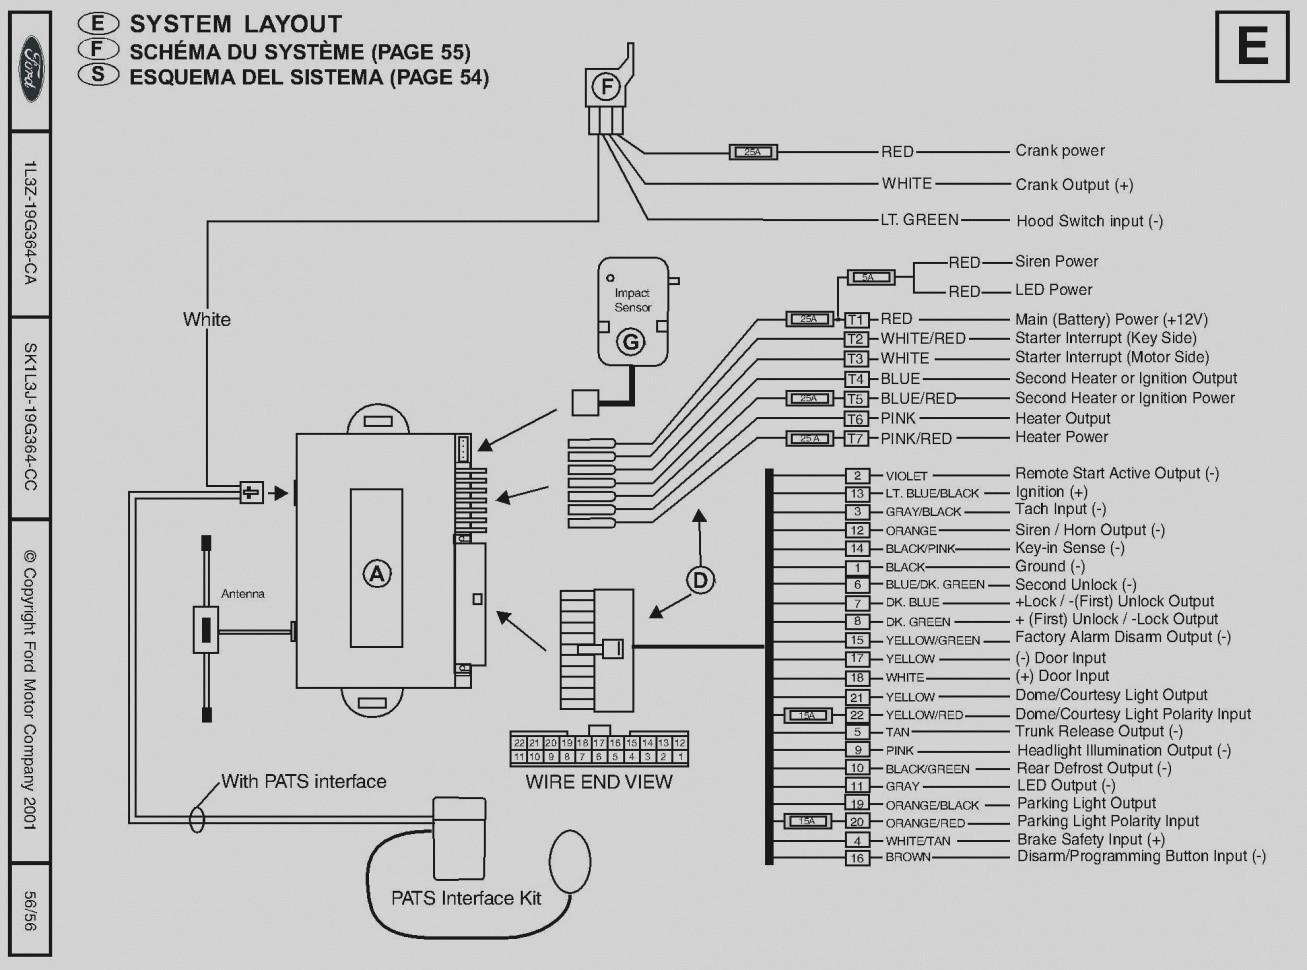 Www The12volt Wiring Diagram Best Awesome At Www The12volt Wiring Diagram